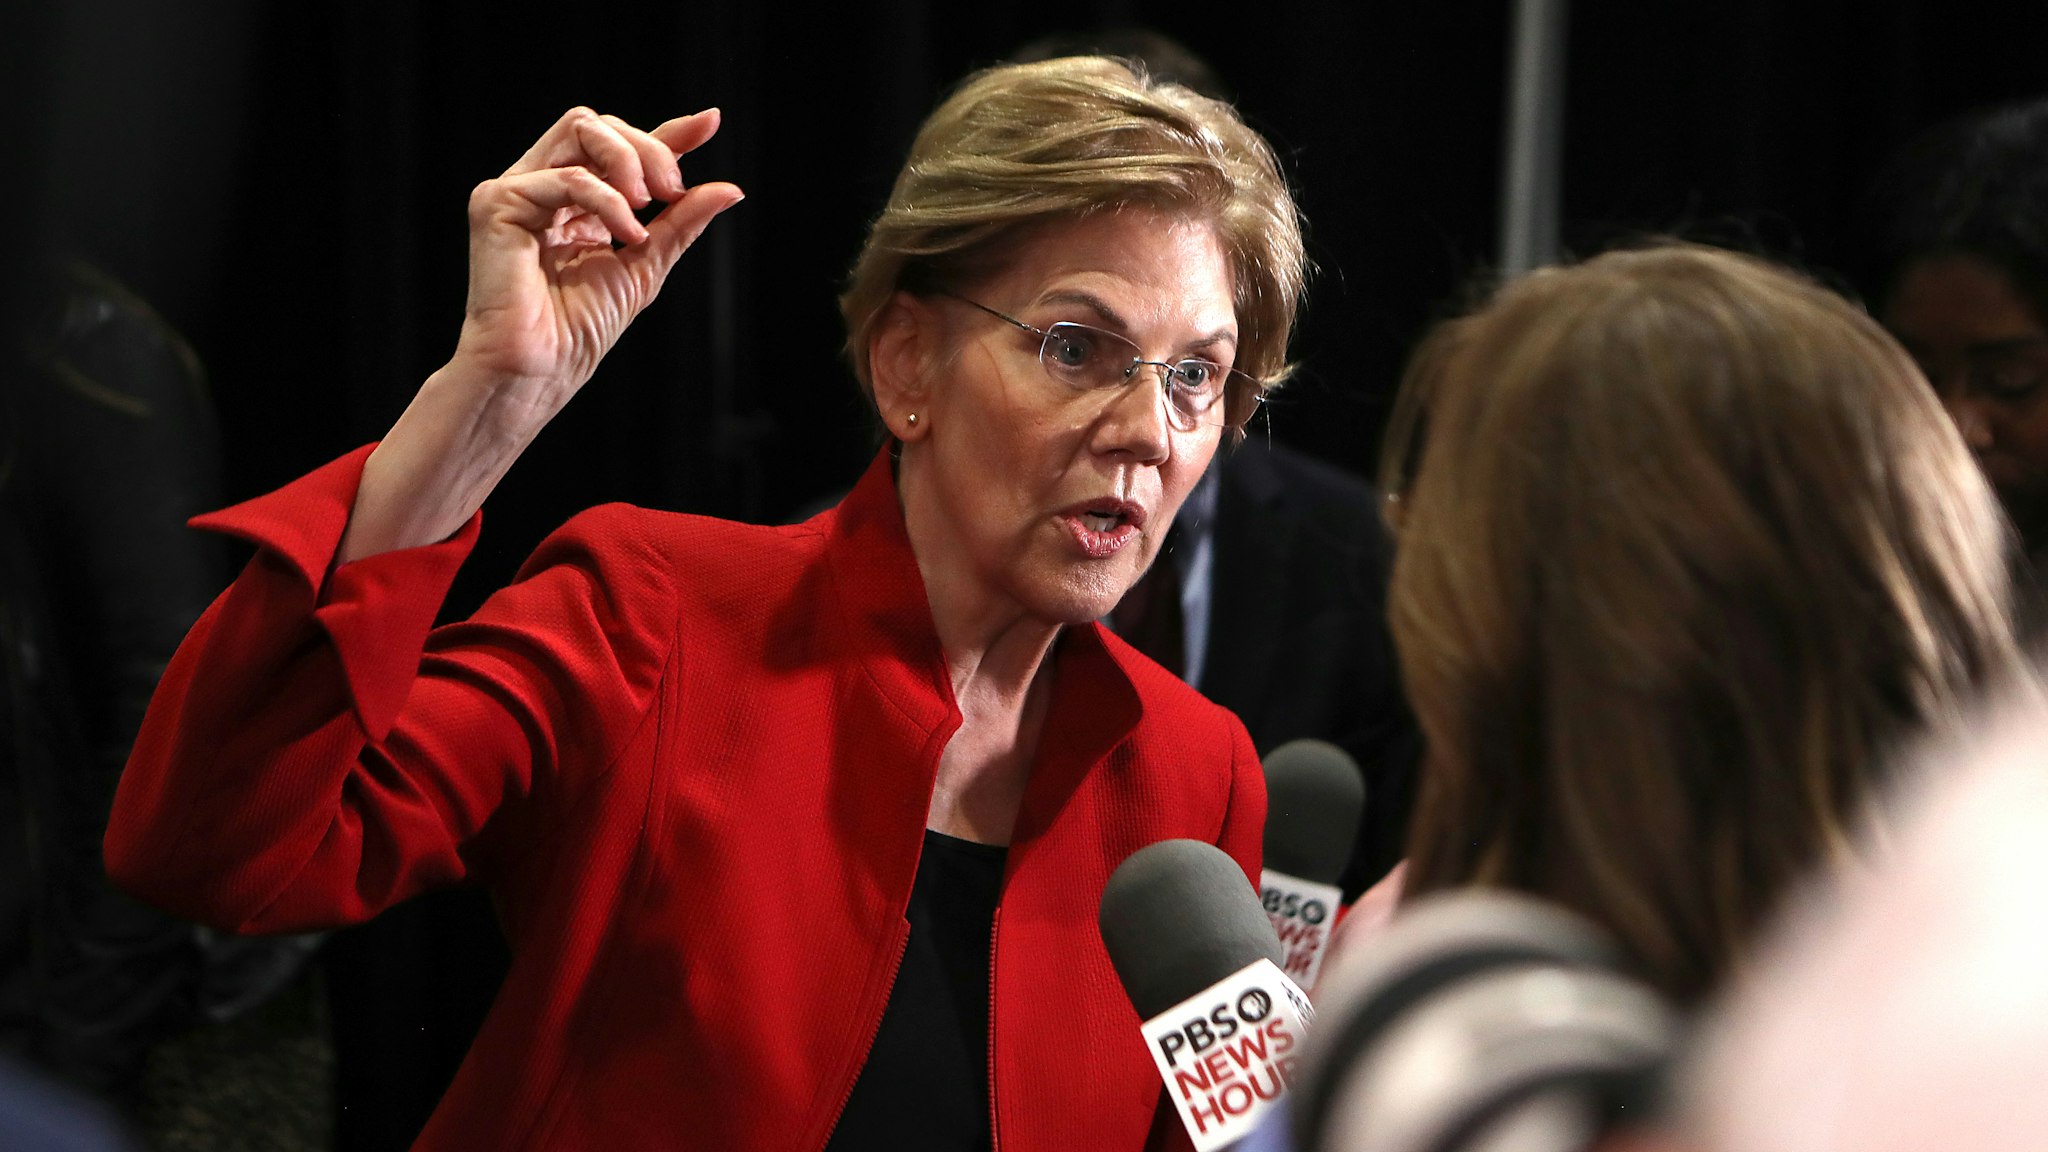 DECEMBER 19: Sen. Elizabeth Warren (D-MA) speaks with the media after the Democratic presidential primary debate at Loyola Marymount University on December 19, 2019 in Los Angeles, California. Seven candidates out of the crowded field qualified for the 6th and last Democratic presidential primary debate of 2019 hosted by PBS NewsHour and Politico.